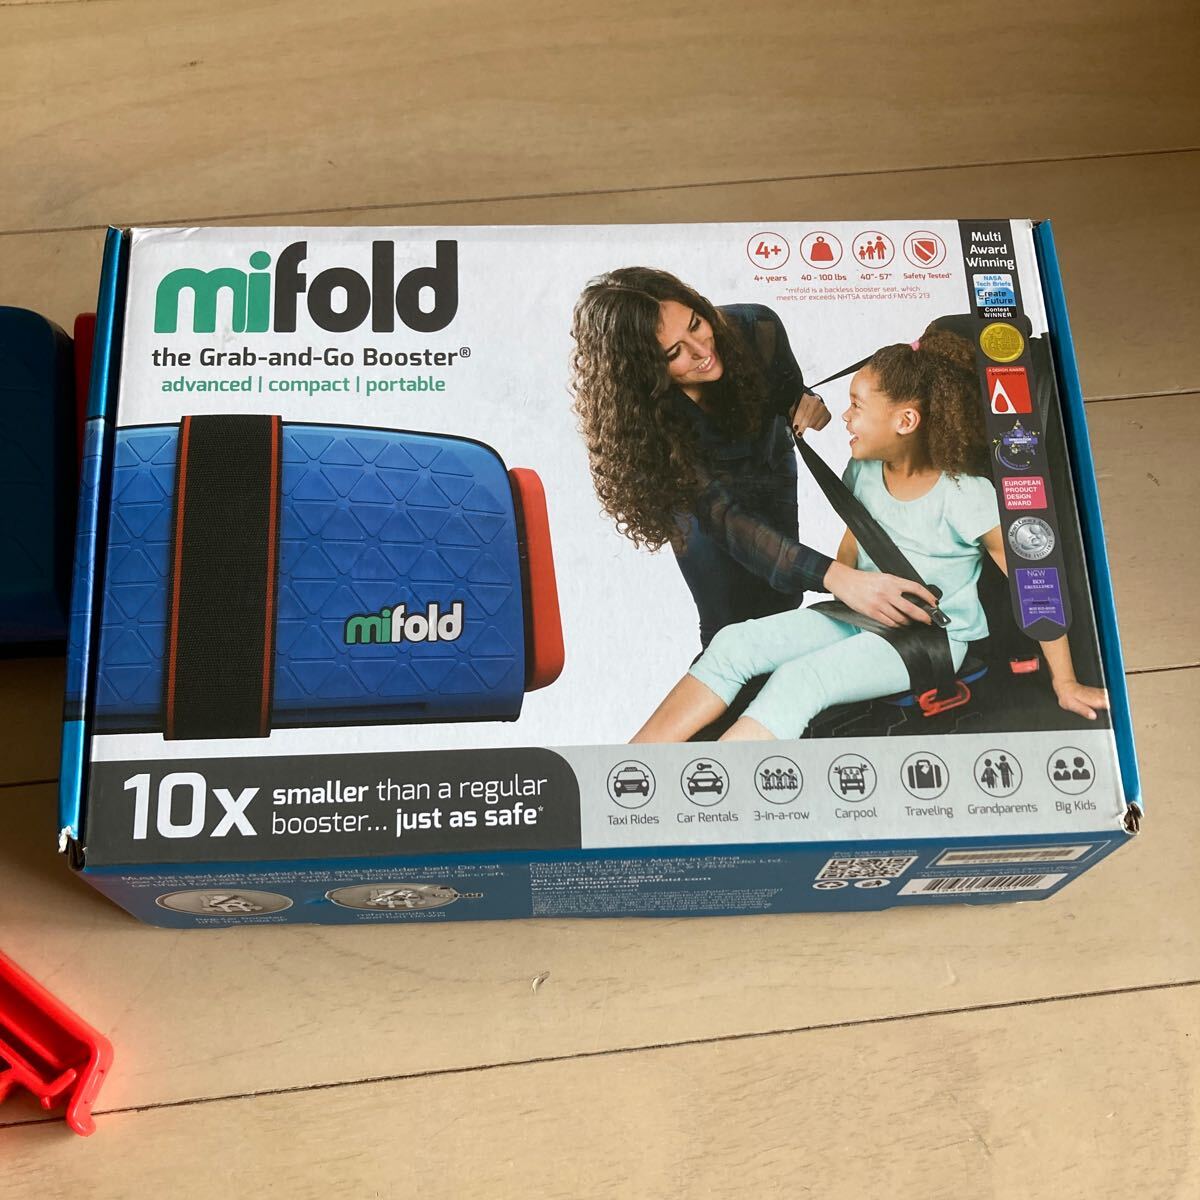 mifold child seat mobile COMPACT